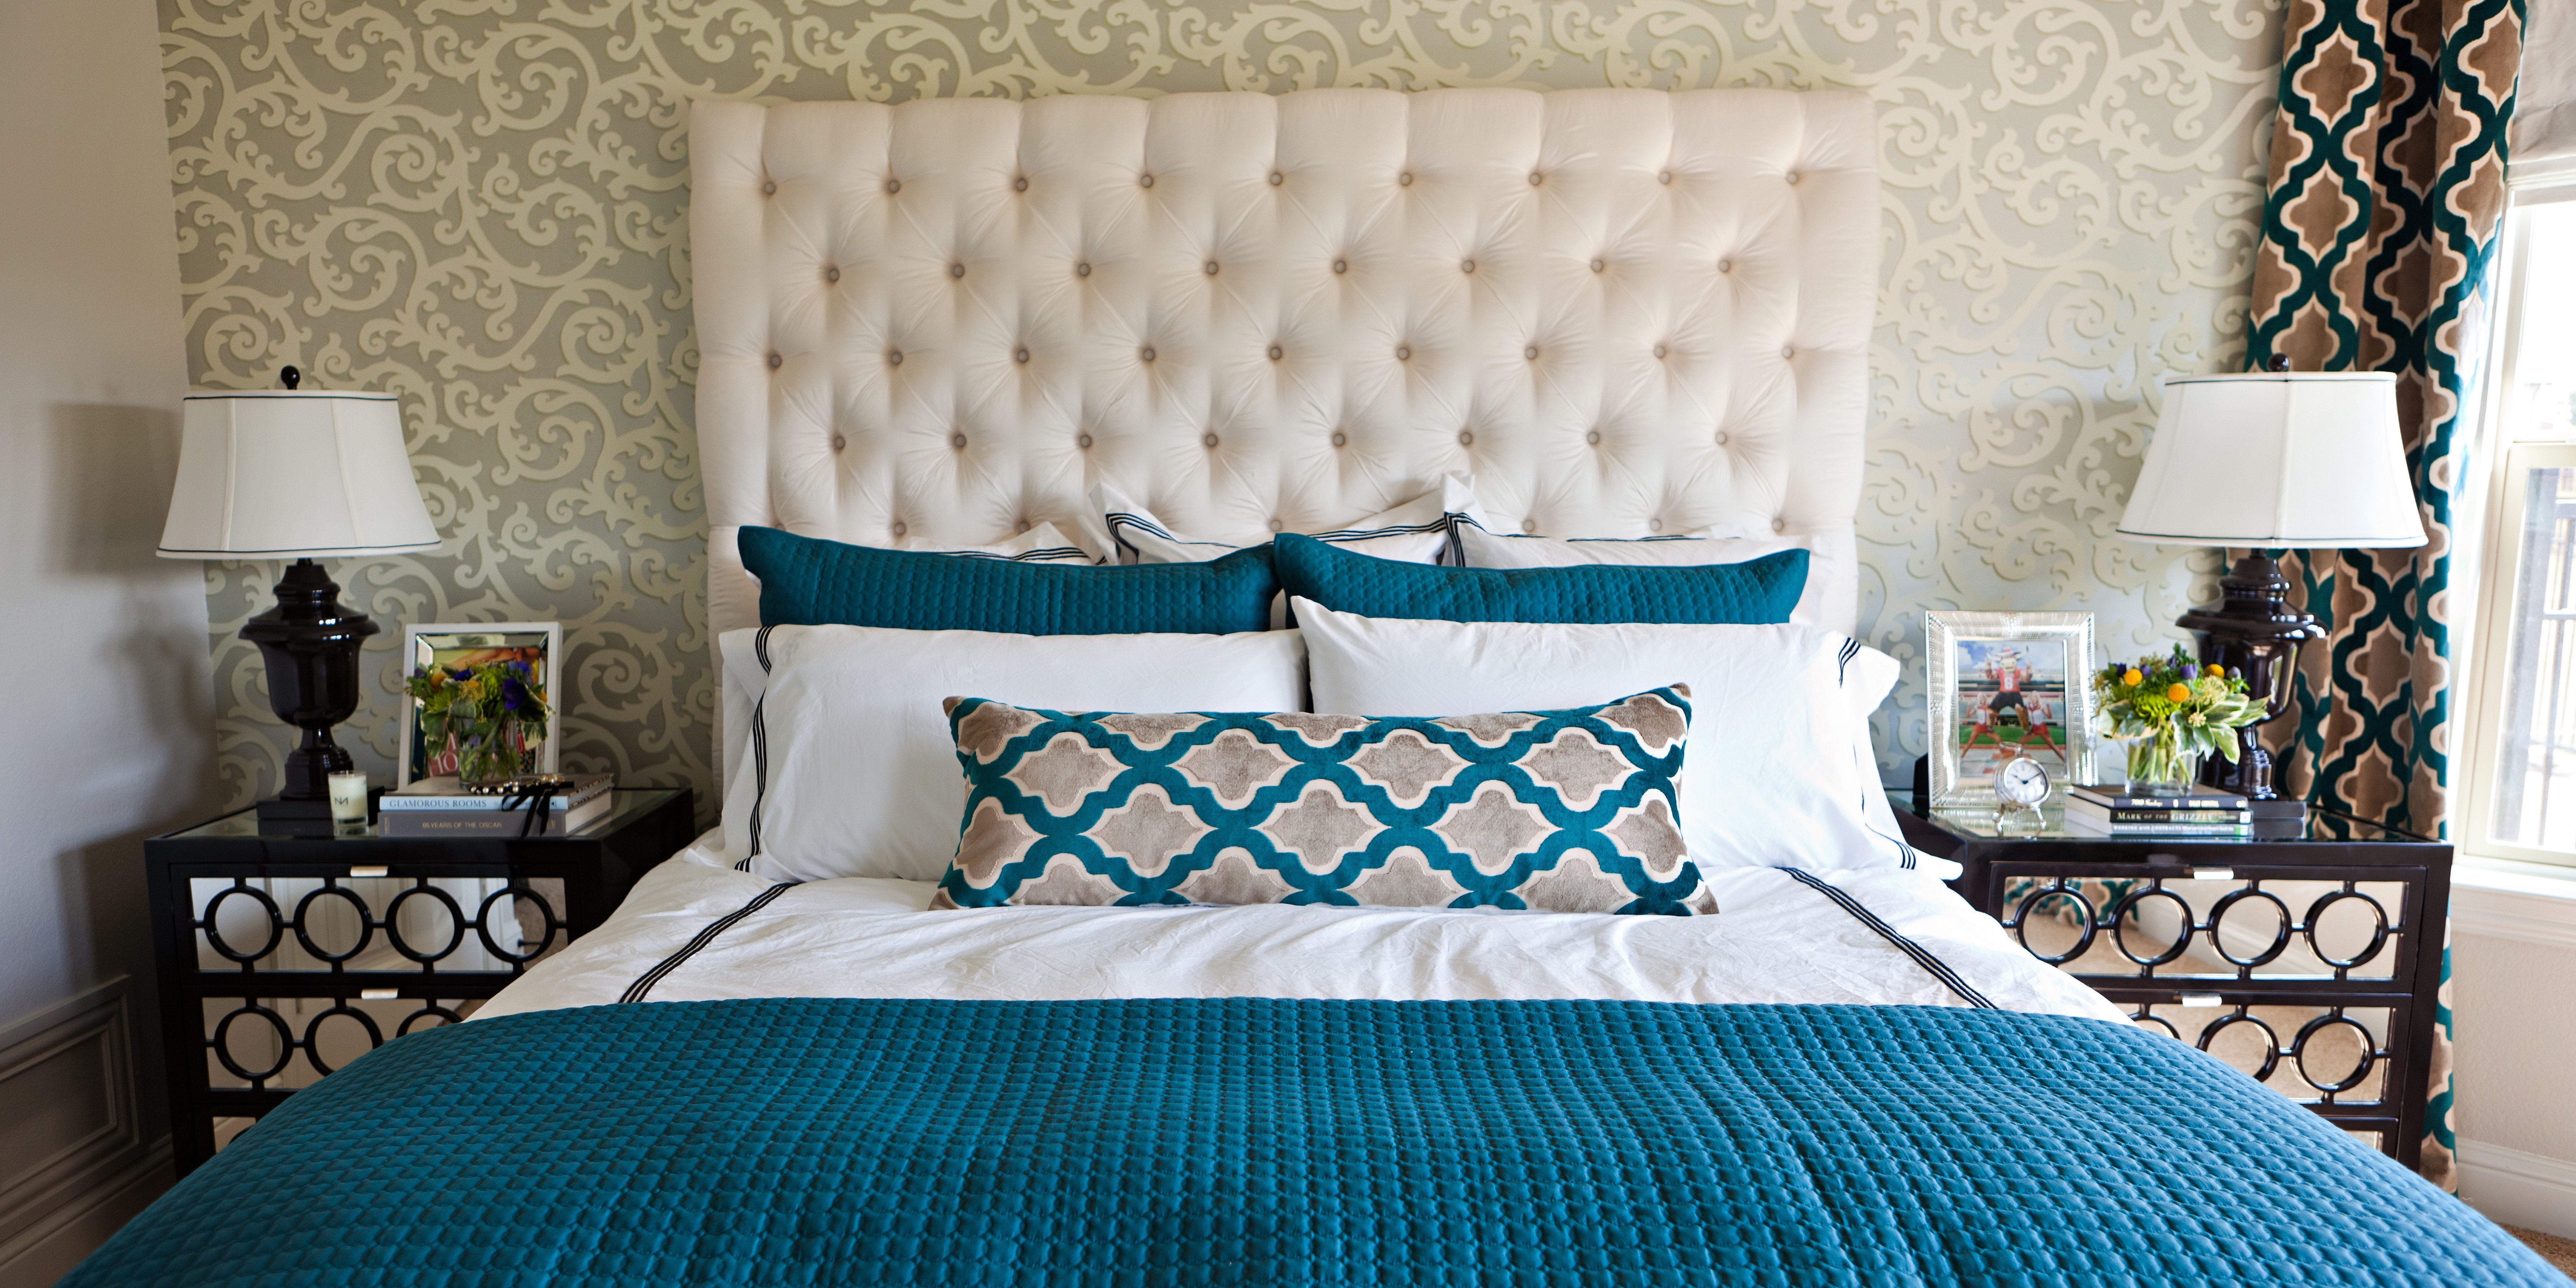 Teal and Gray Bedroom Decor Best Of Cool Teal Home Decor for Spring and Summer